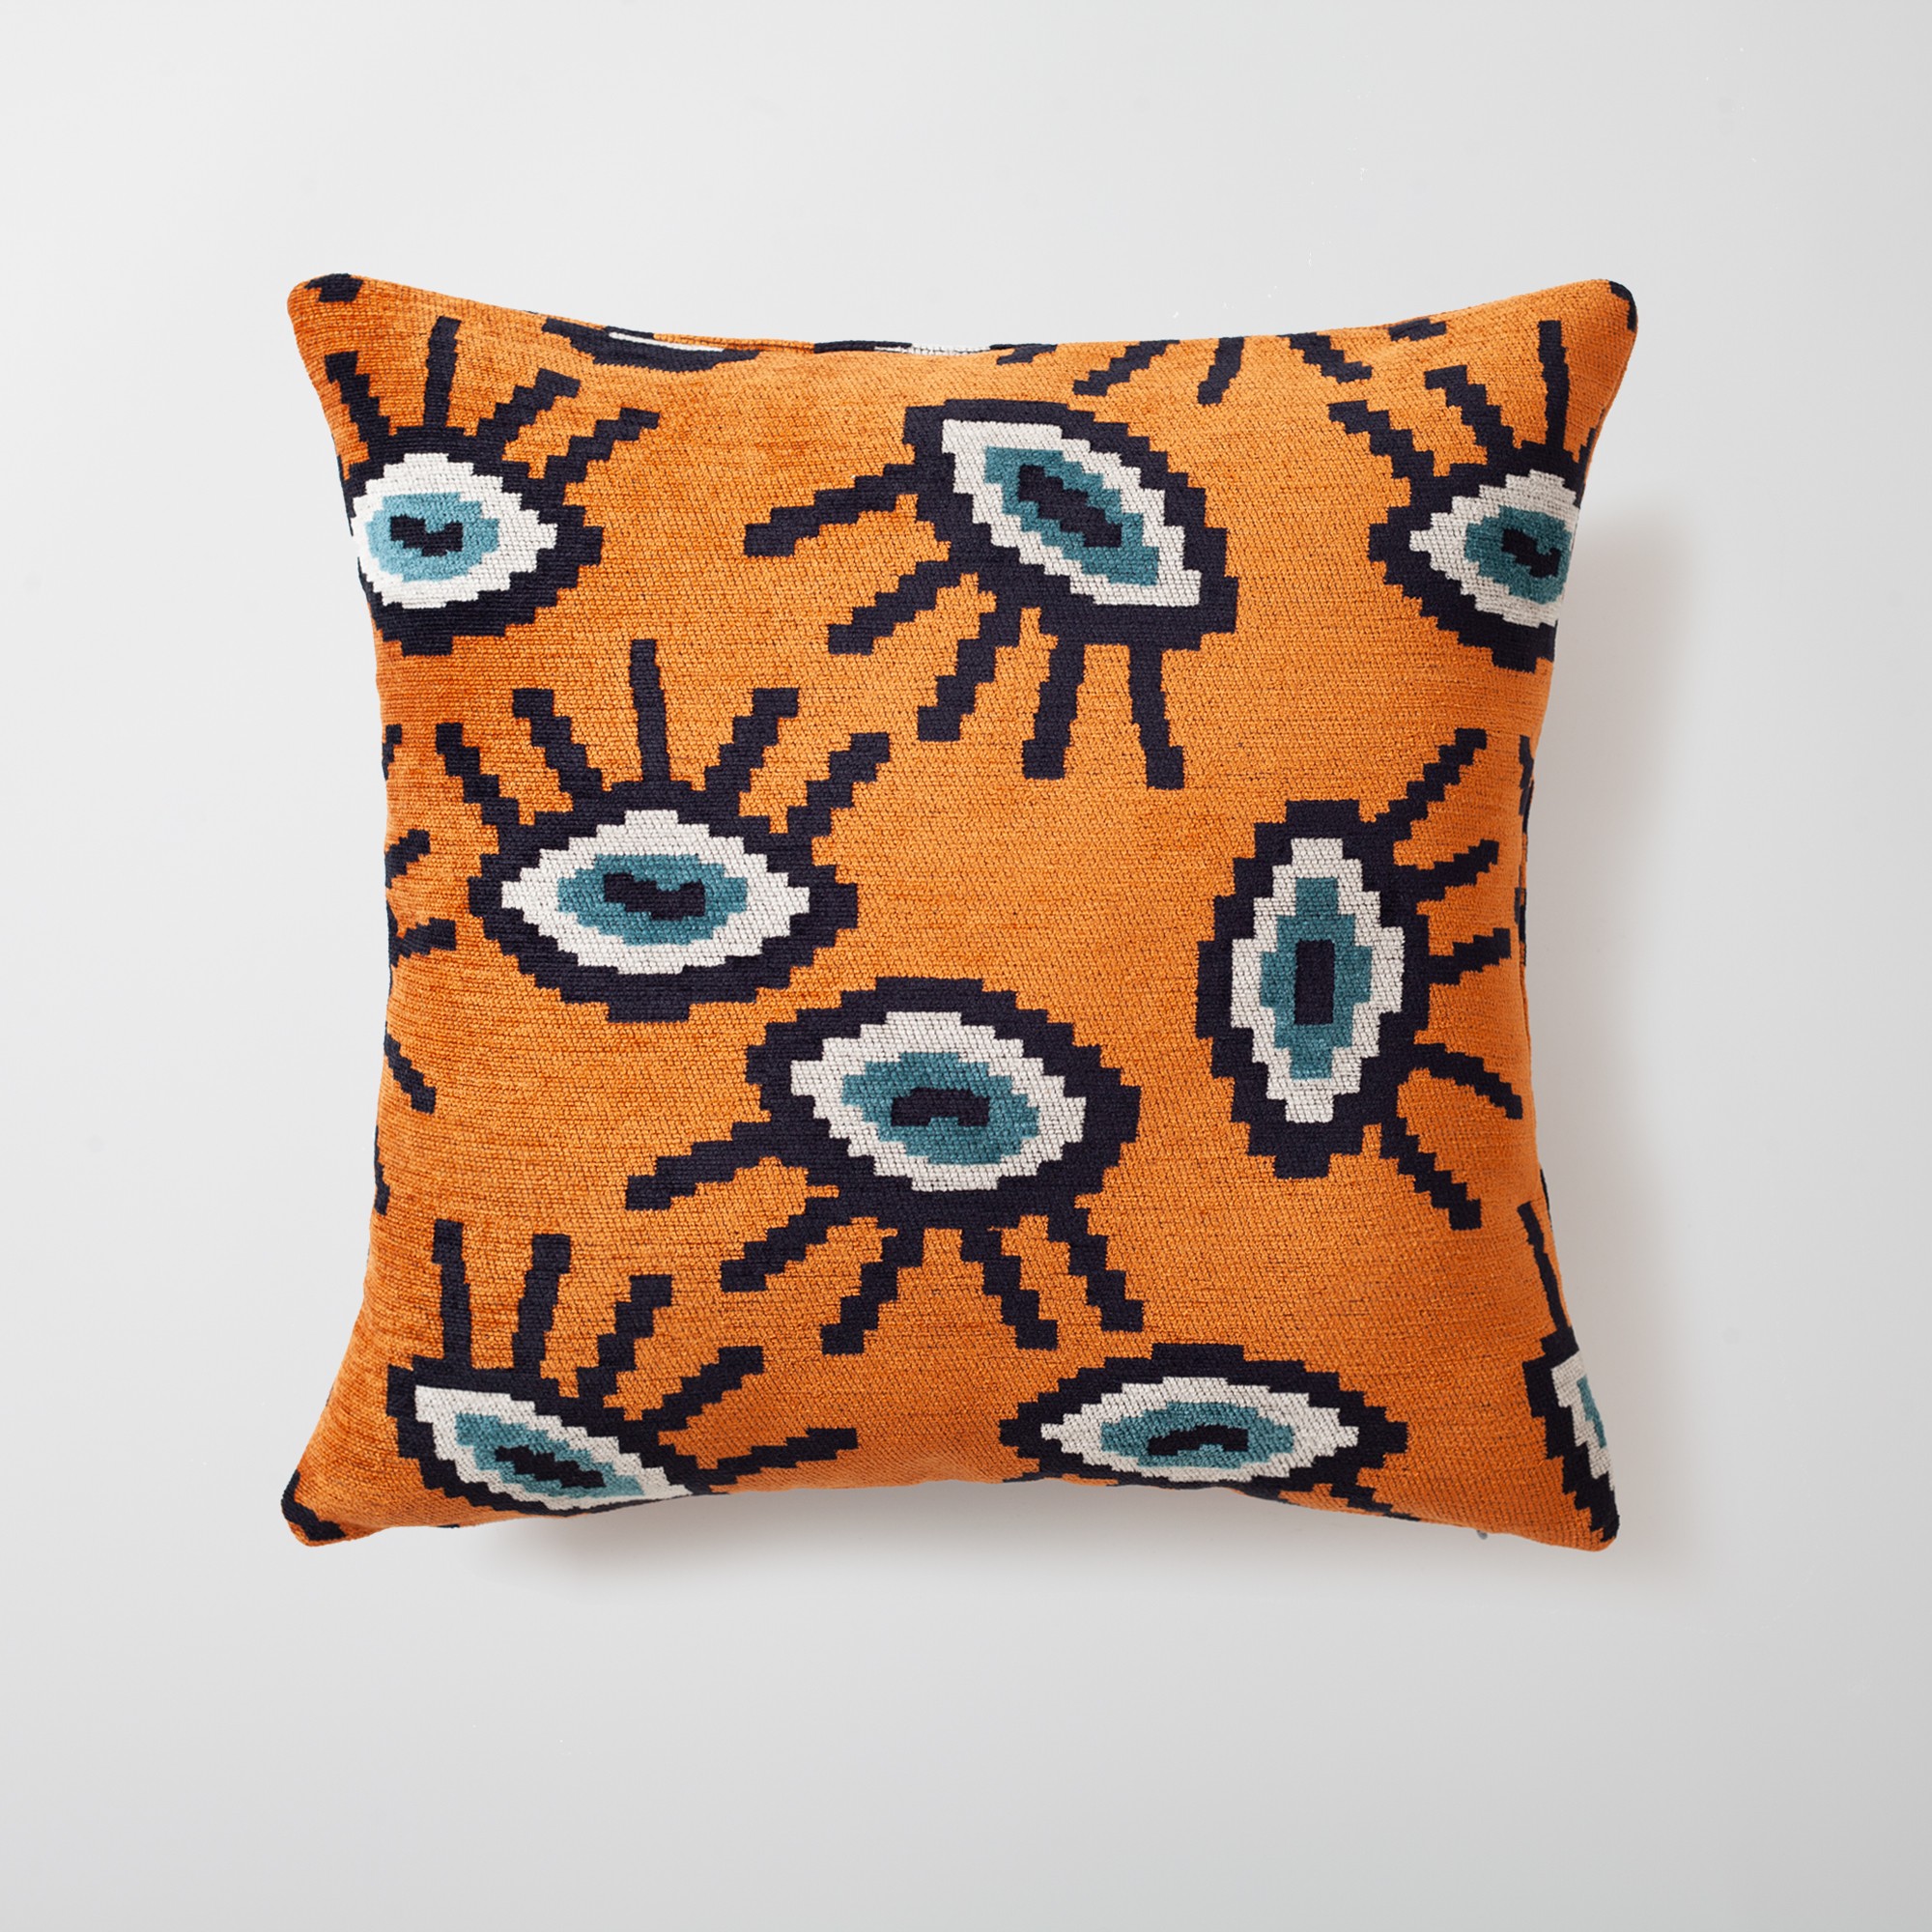 " Yonobi " - Eye Patterned Throw Pillow 18x18 Inch - Orange (Cover Only)